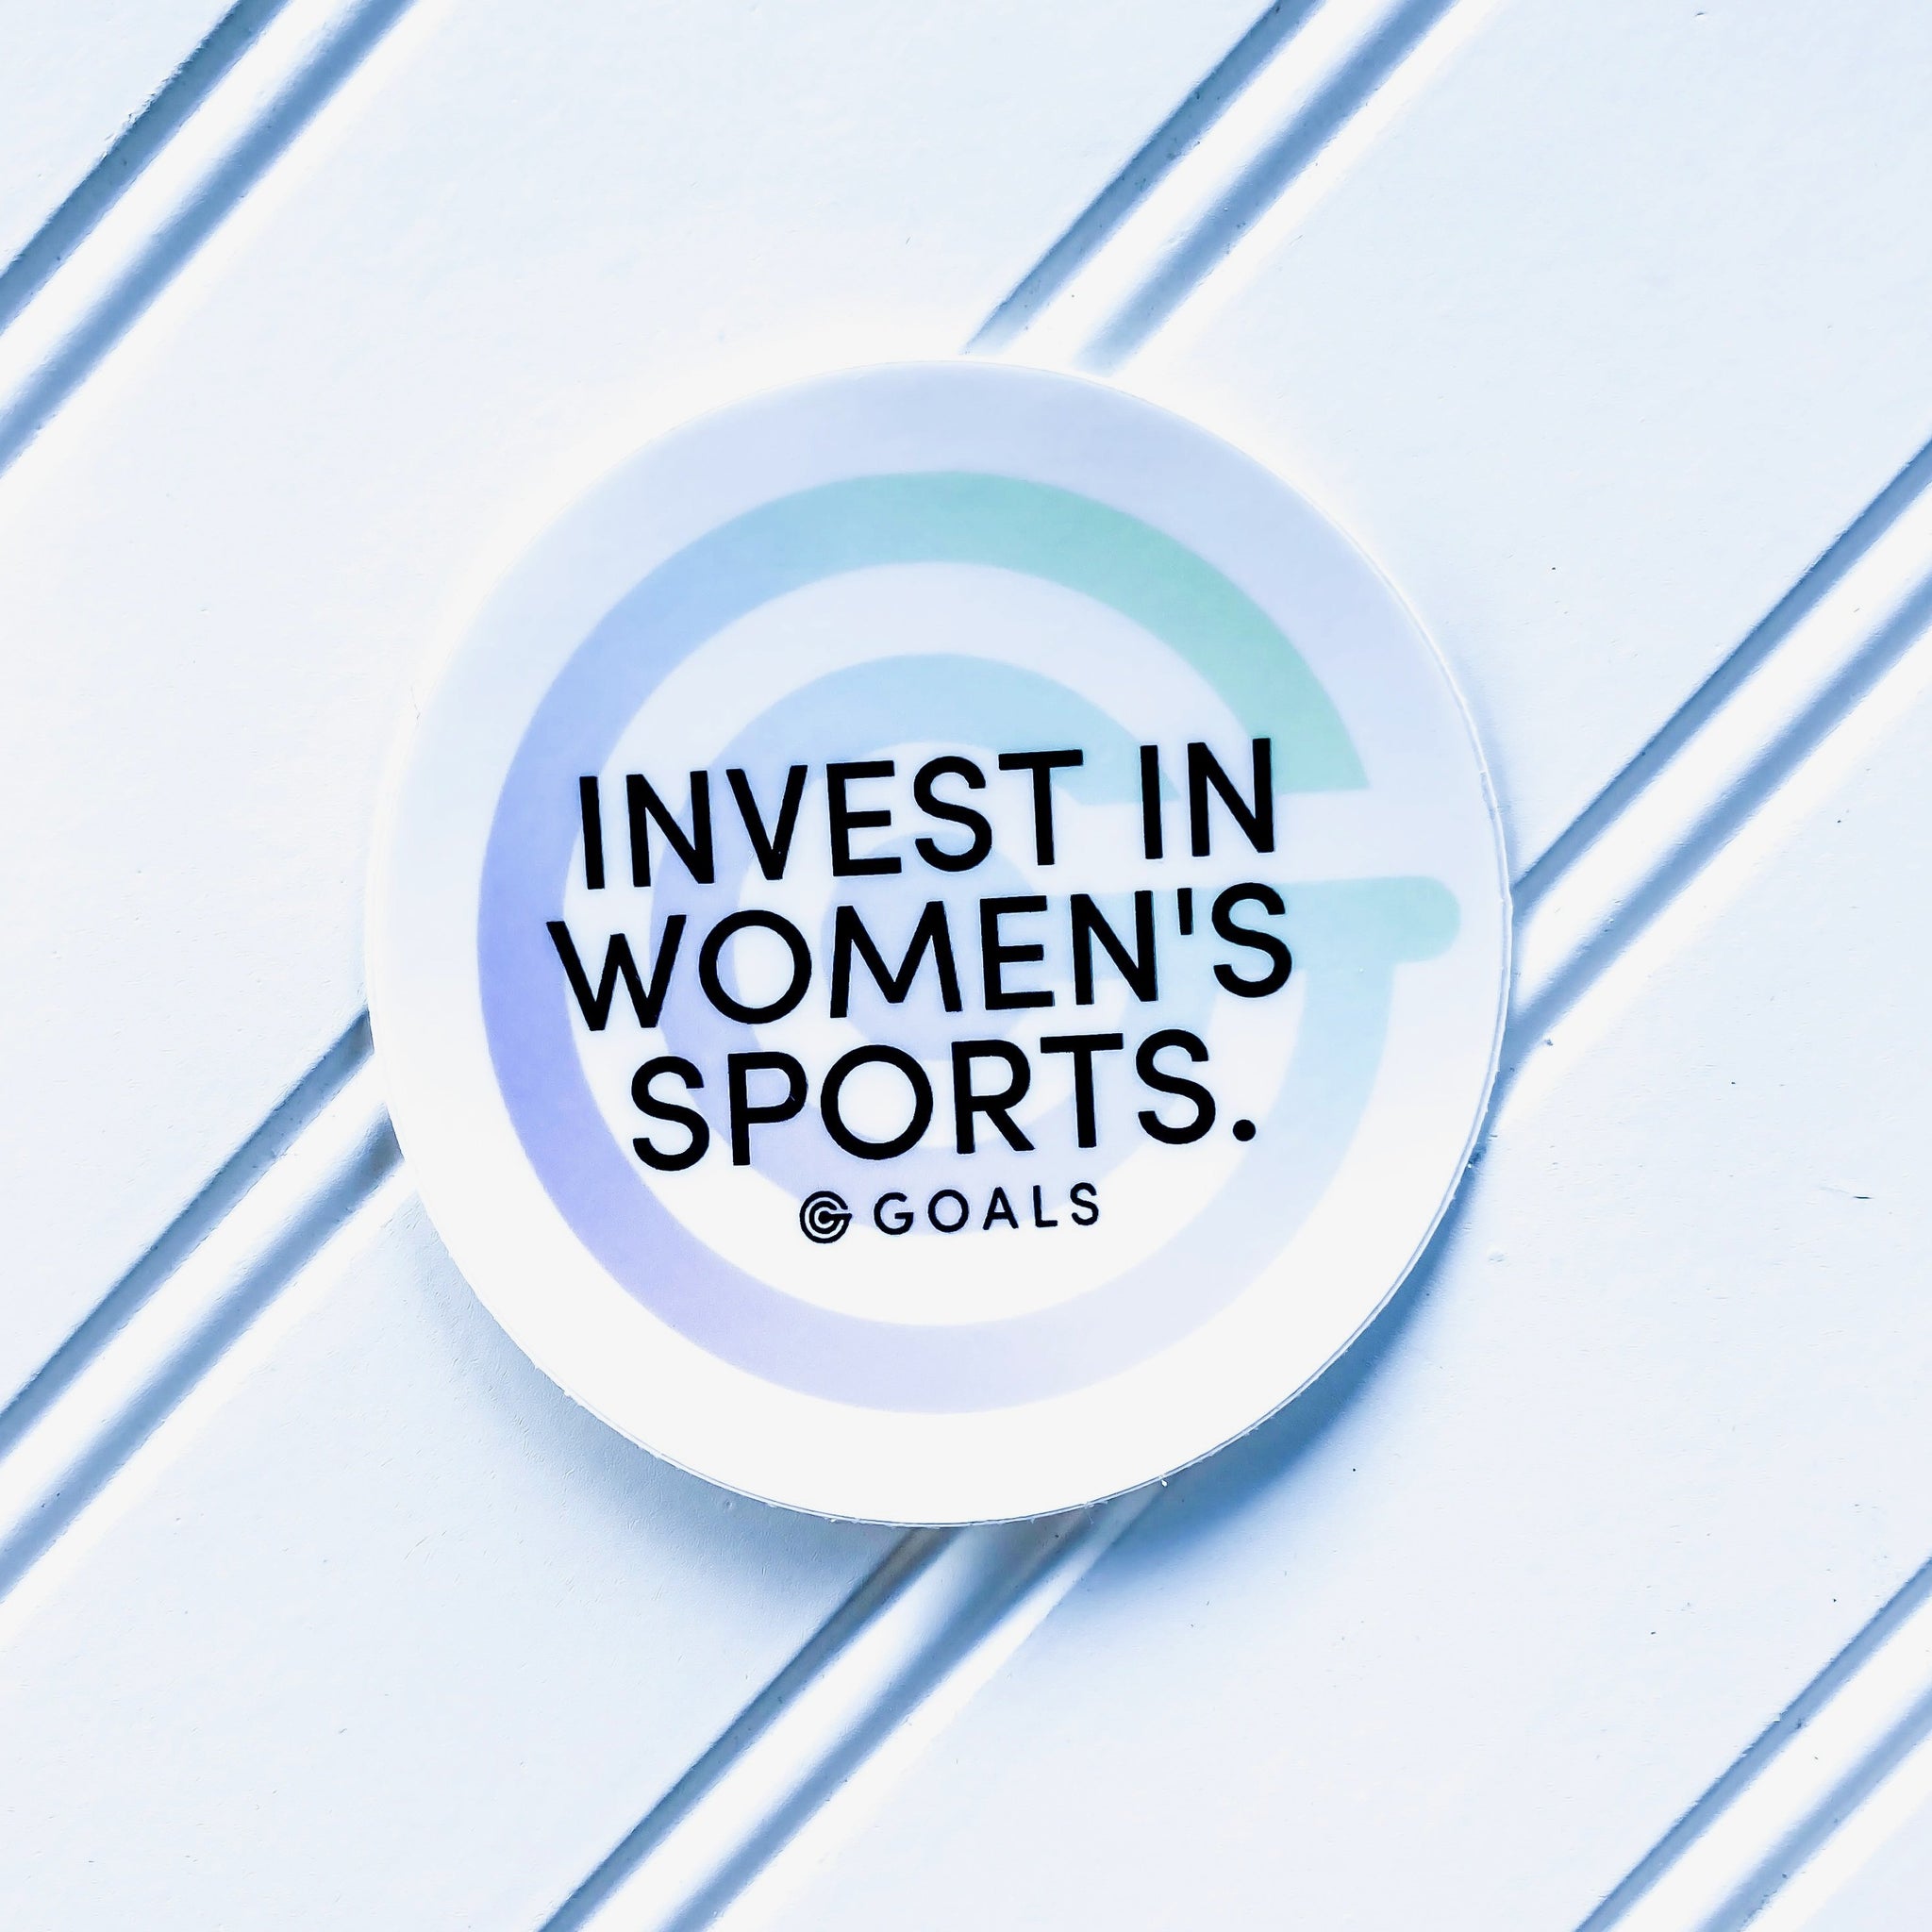 Women's sports are good investments, industry experts say - The